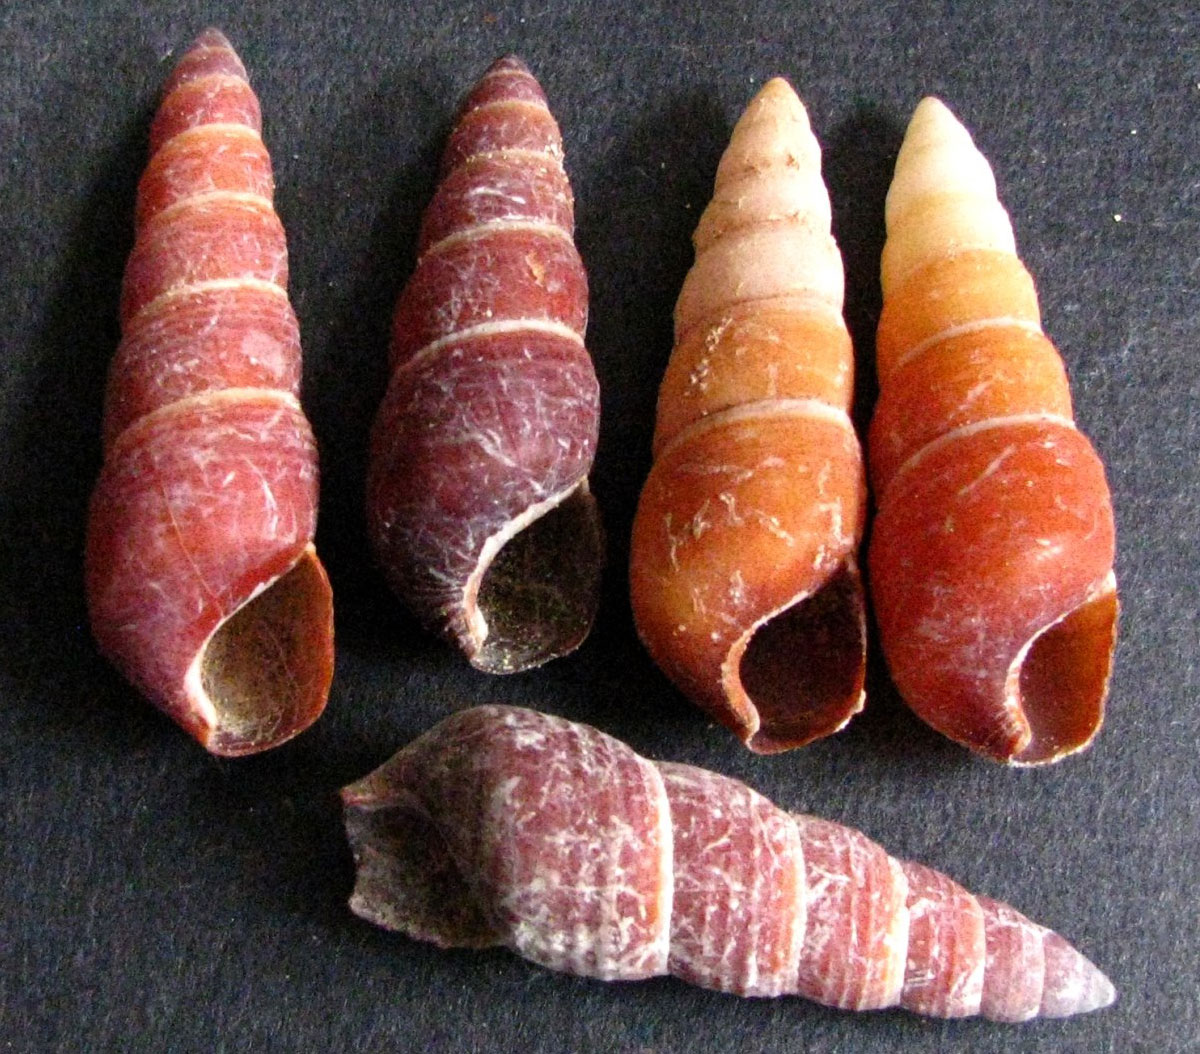 Photograph of land snail shells of the species Carelia cochlea from Kauai. The shells range from dark pink to orangish in color and are elongated in shape. Five shells are shown in the image, four in a line with their spires pointing upward, and one underneath with the tip of its spire pointed to the right.